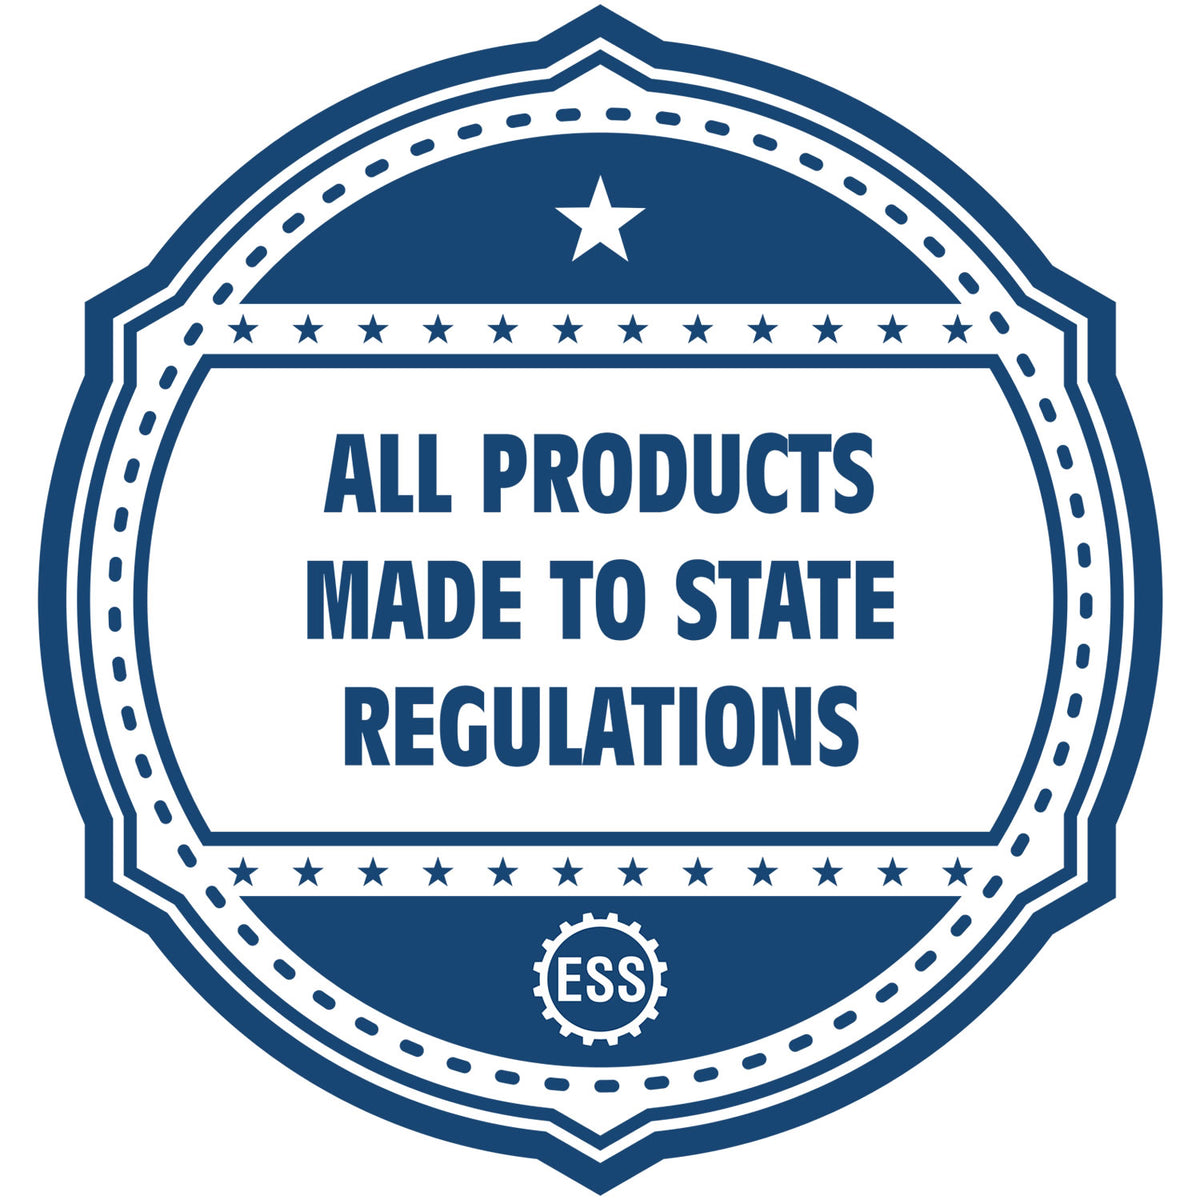 An icon or badge element for the Heavy Duty Cast Iron Maryland Engineer Seal Embosser showing that this product is made in compliance with state regulations.